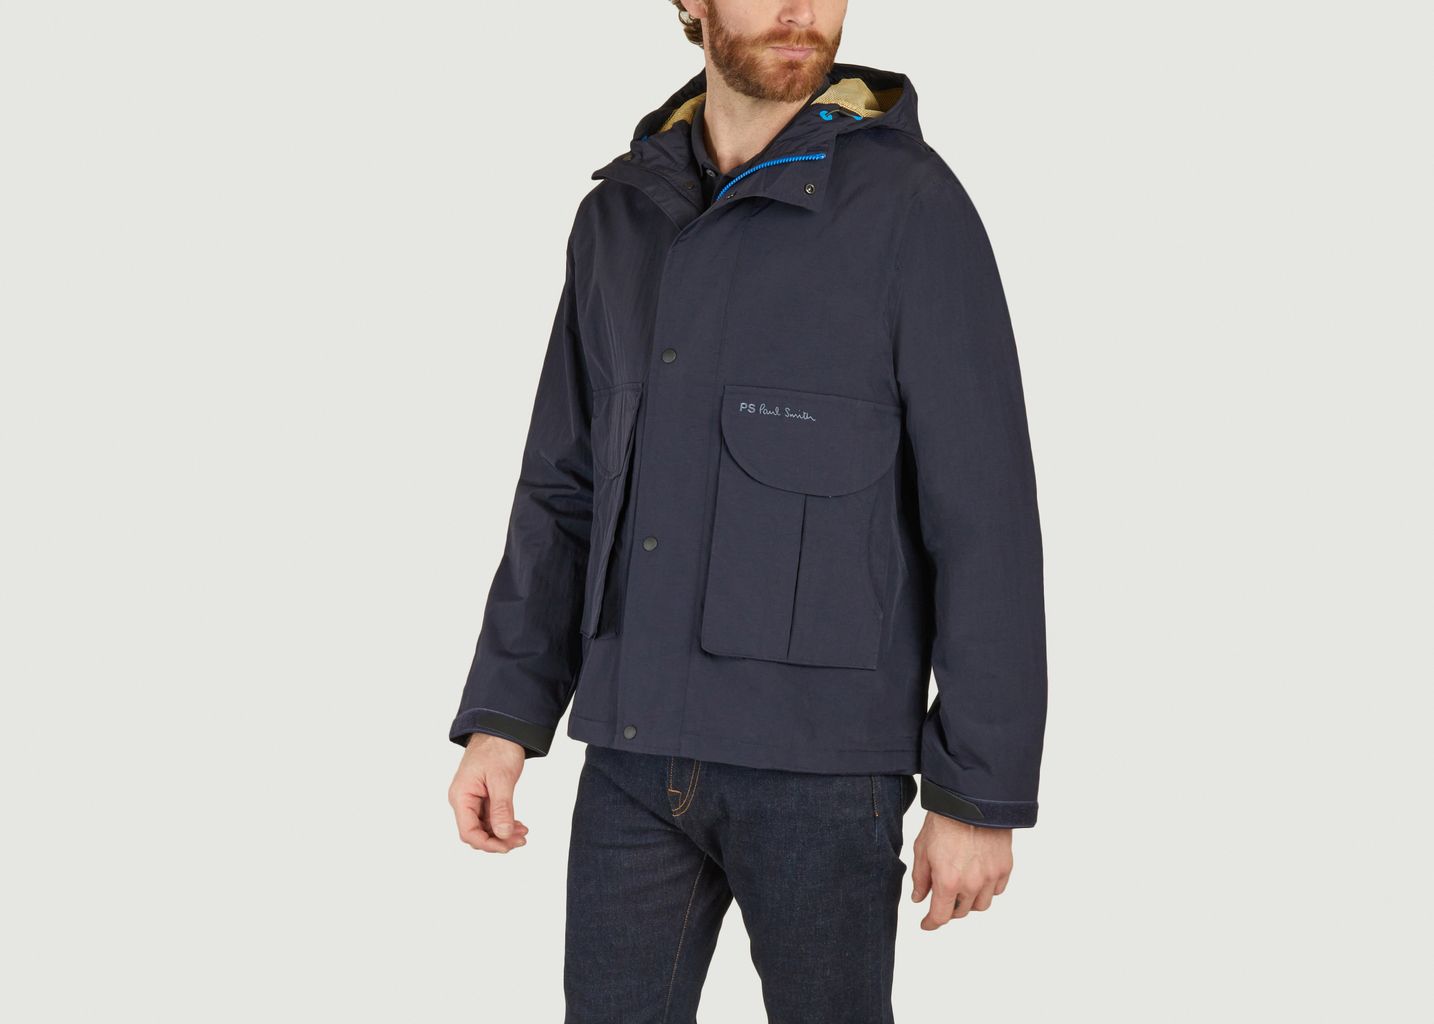 Fishing Jacket - PS by PAUL SMITH